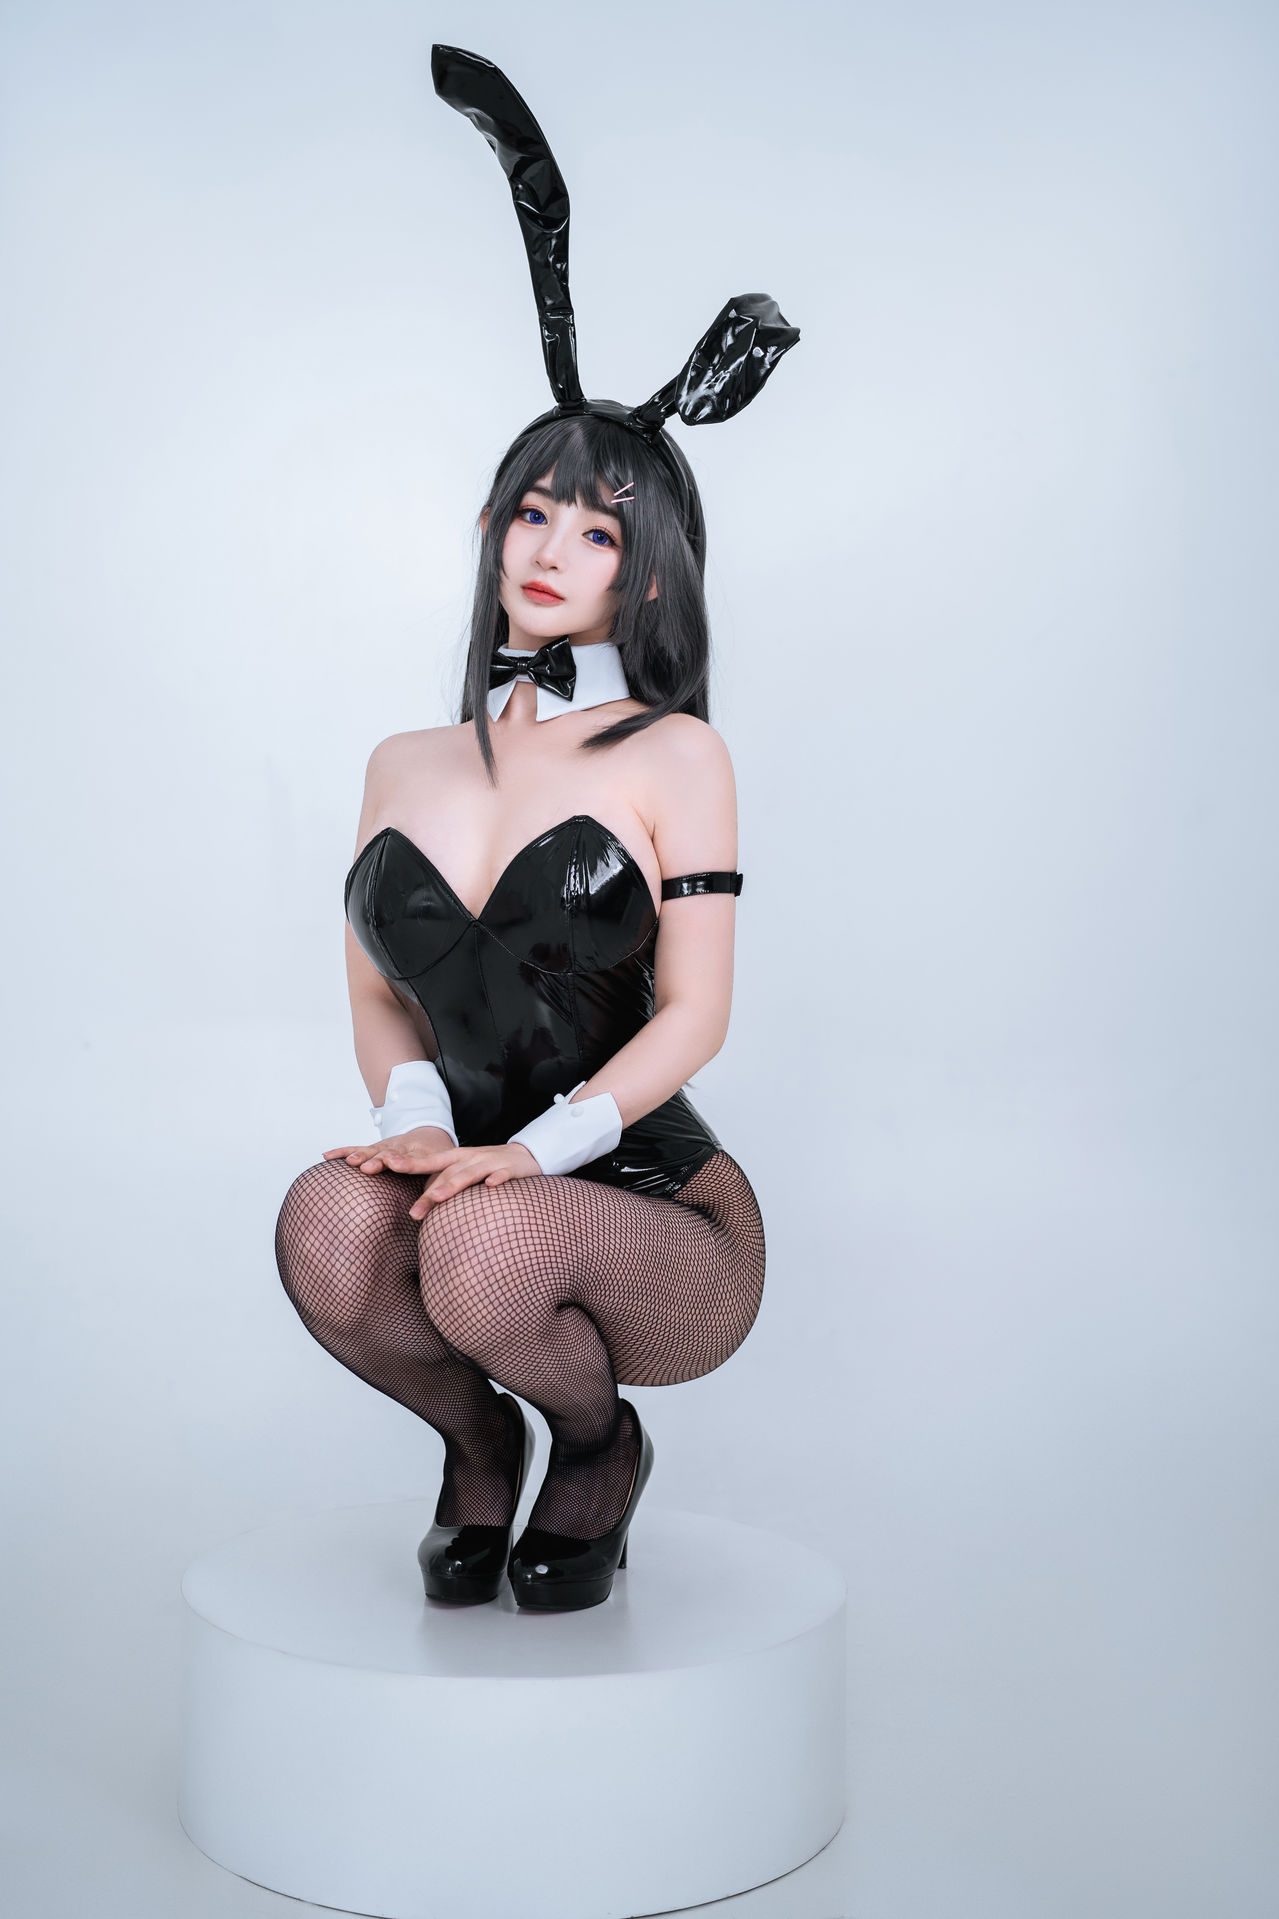 Ourei is Ourei partme member and Ourei Bunny(18)